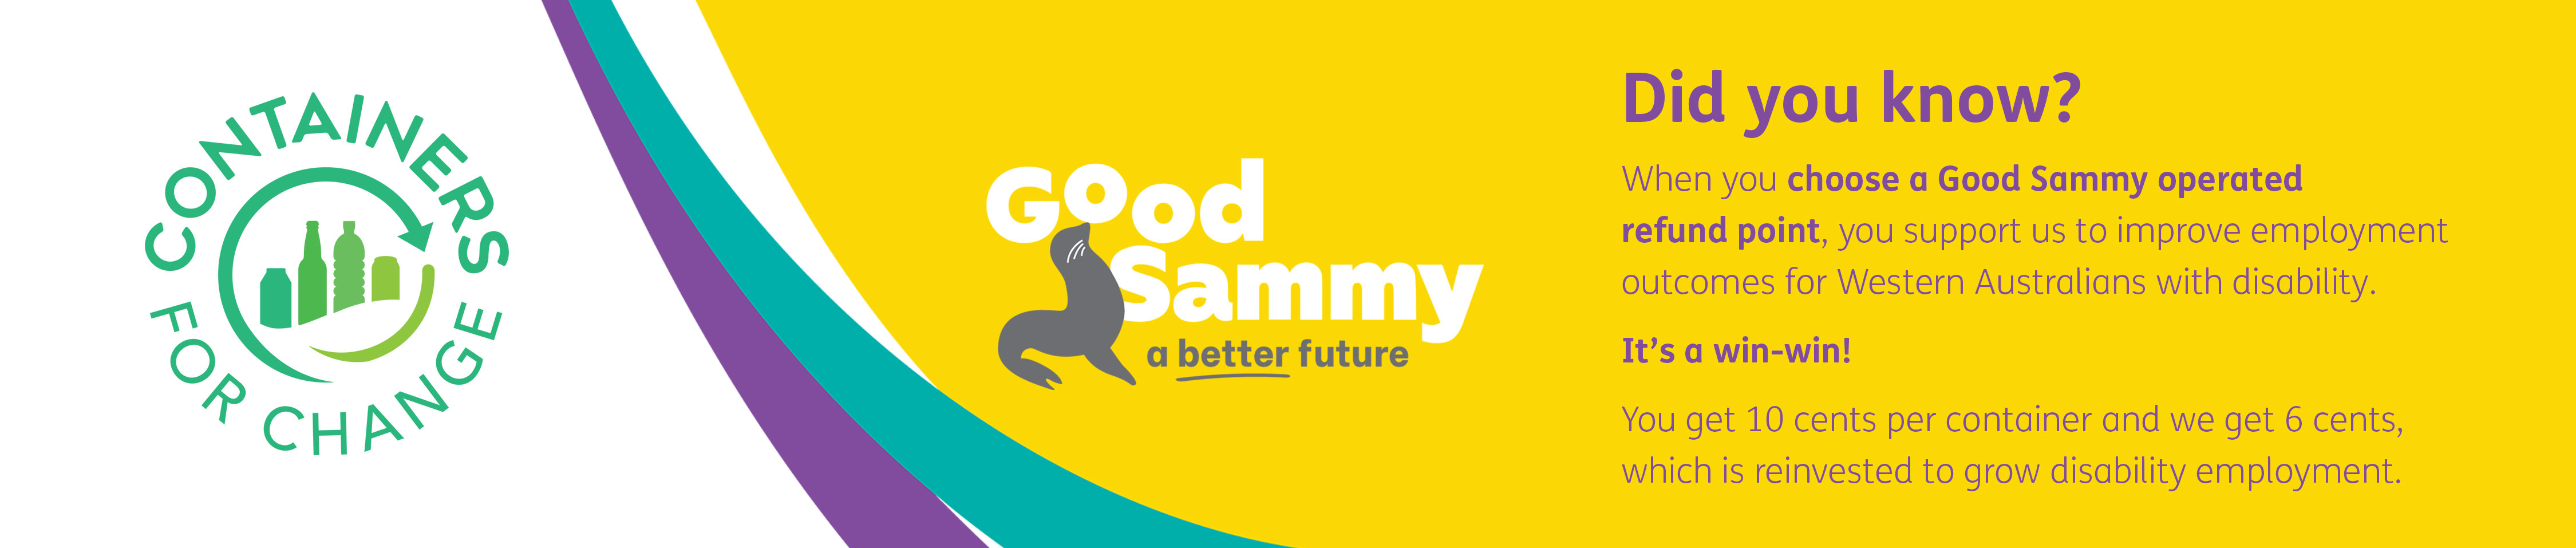 A banner that says: Did you know? When you choose a Good Sammy operated refund point, you support us to improve employment outcomes for Western Australians with disability.  It’s a win-win!  You get 10 cents per container and we get 6 cents, which is reinvested to grow disability employment..